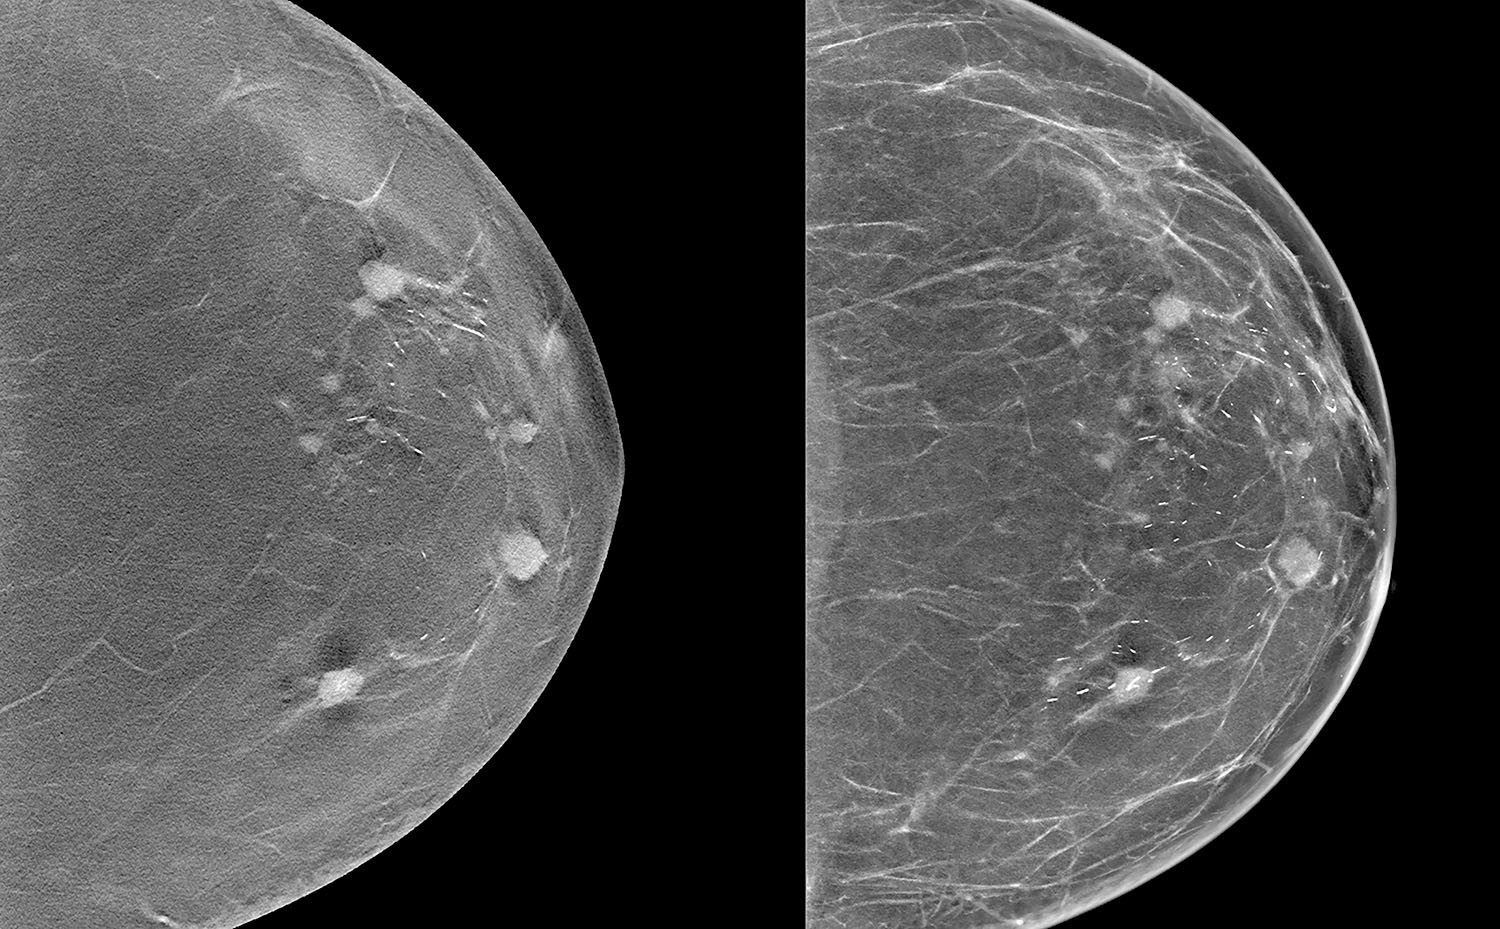 images from a three-dimensional mammogram scan